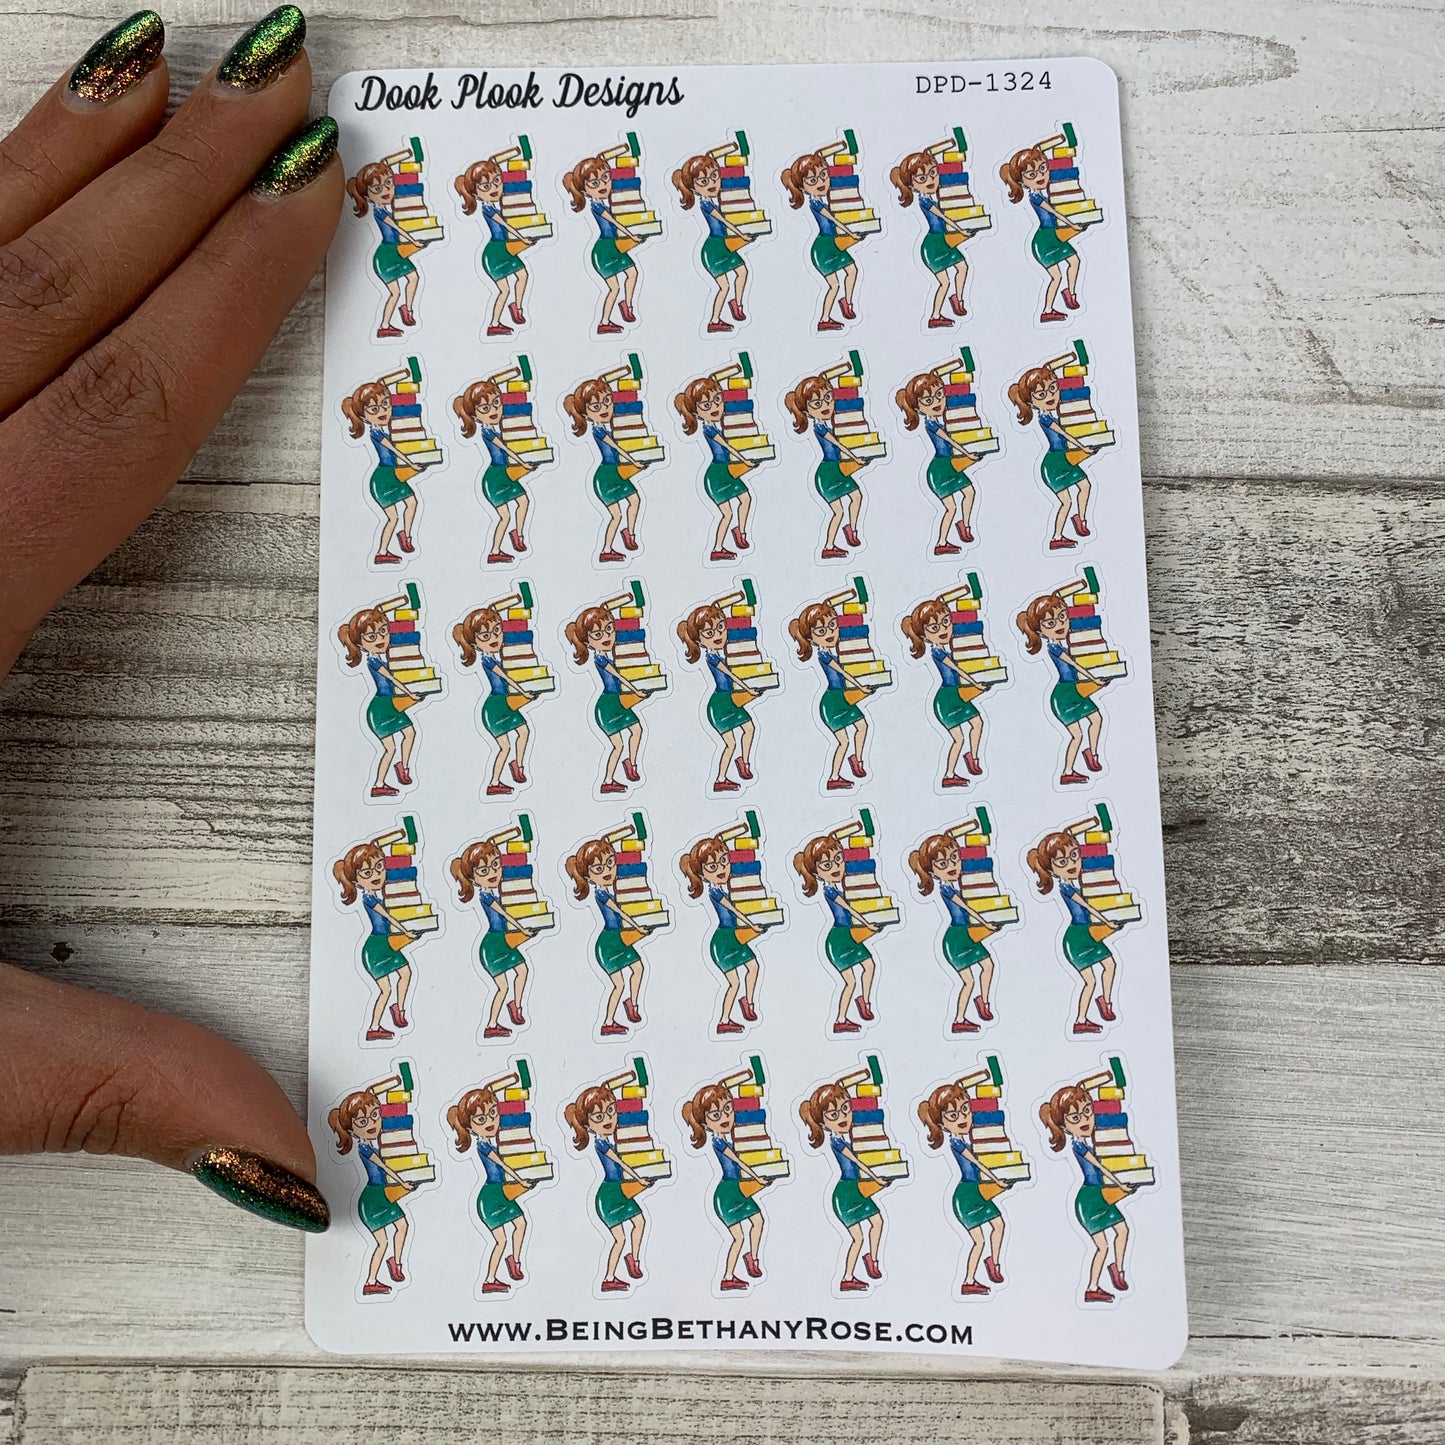 Reading / Studying/ Book Stack girl stickers (DPD-1324)